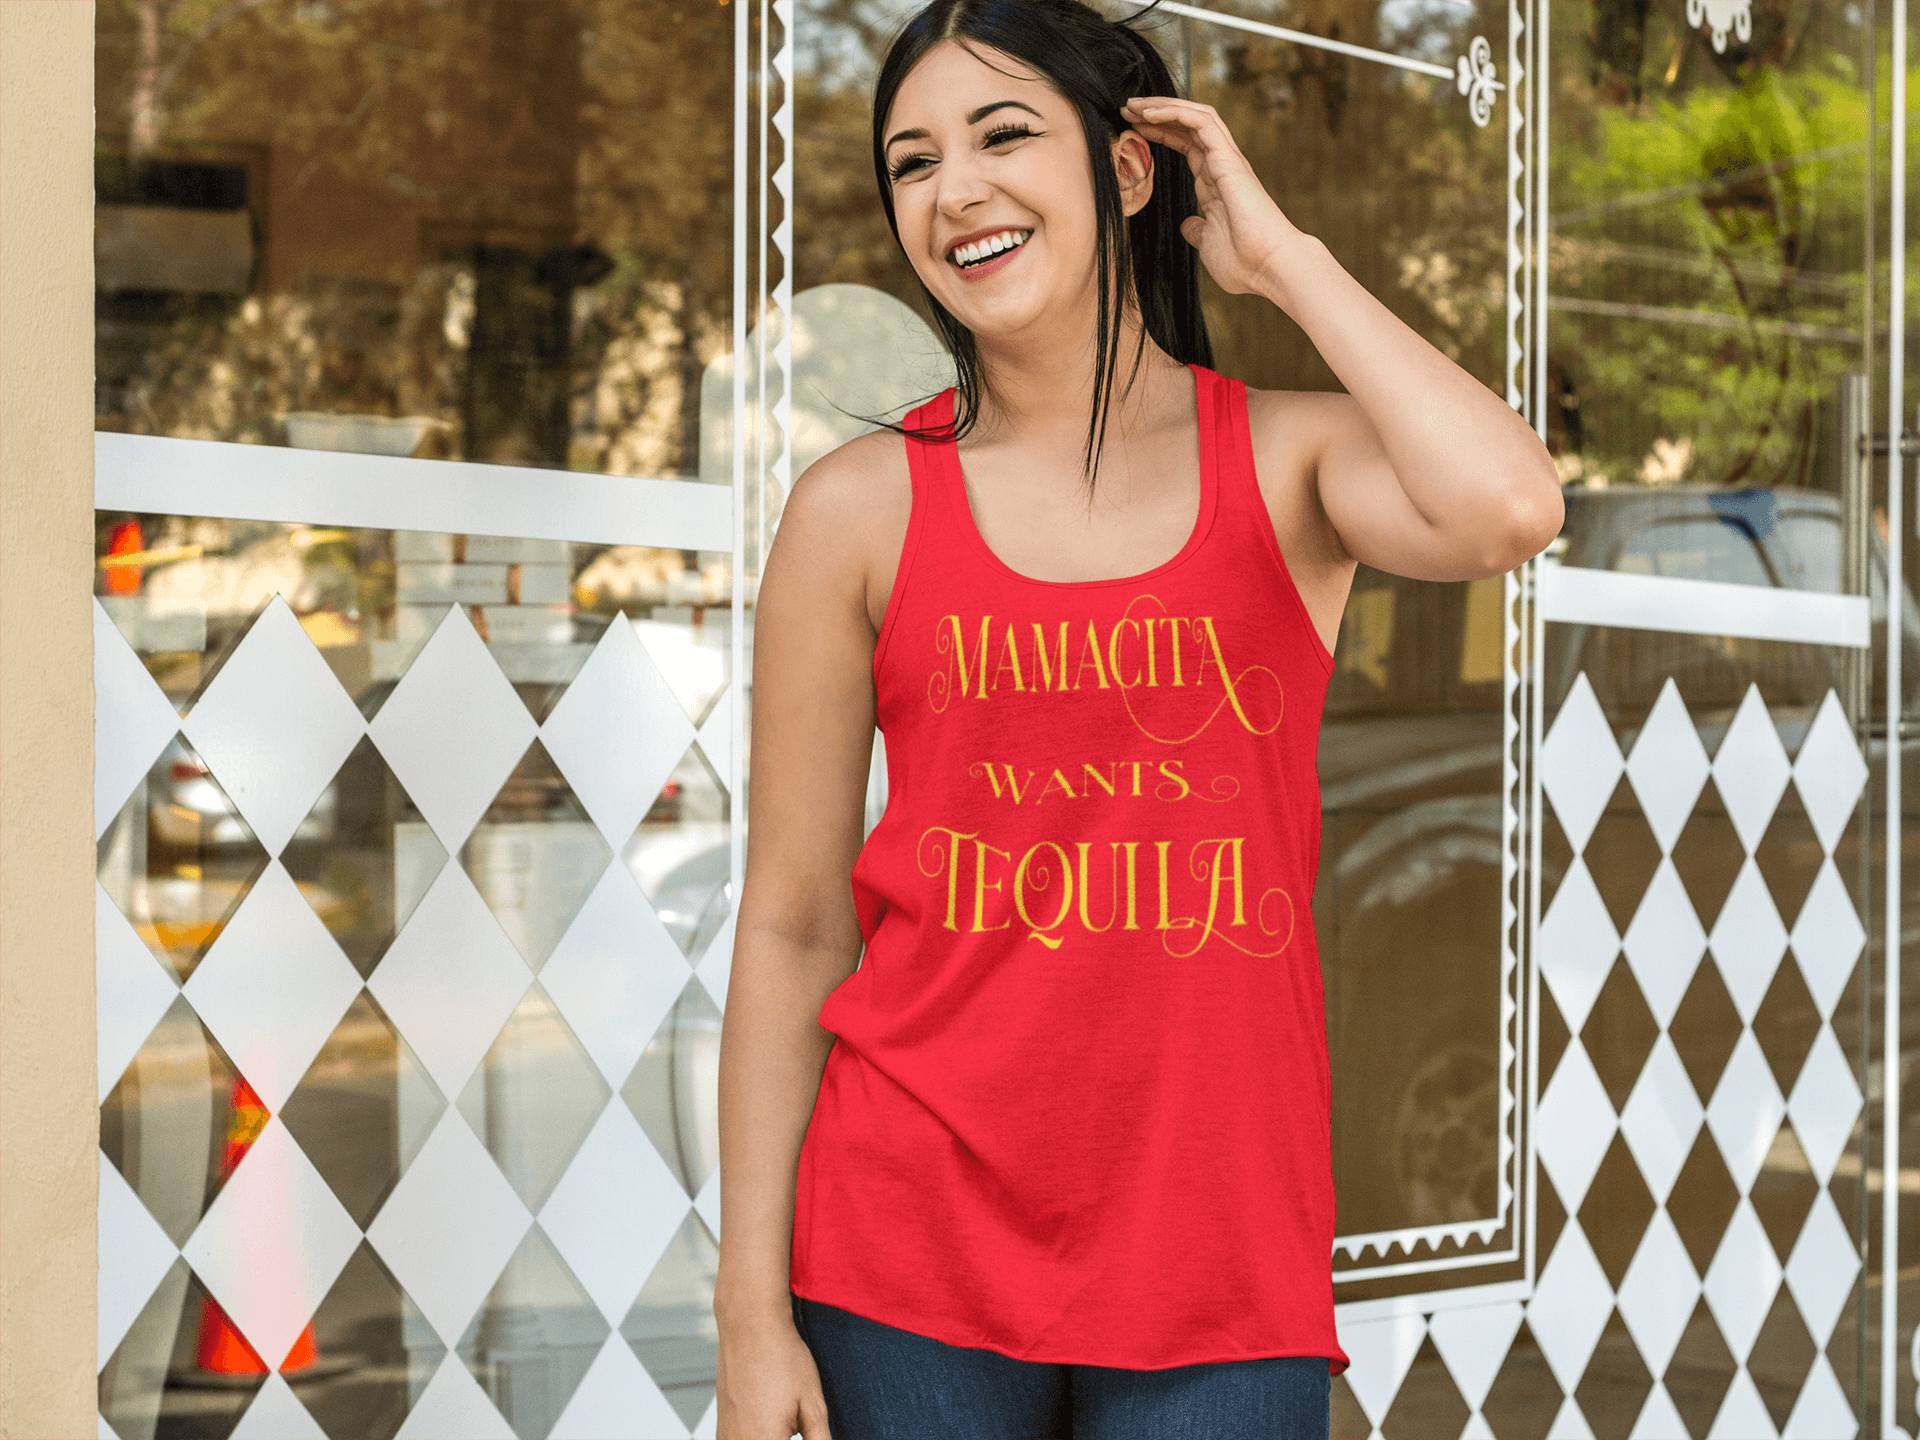 Red racerback tank with the text, "Mamacita Wants Tequila" in scriptive font and yellow ink. This sexy tee comes in sizes small thru 3XL. It is available at www.sanchezhere.com